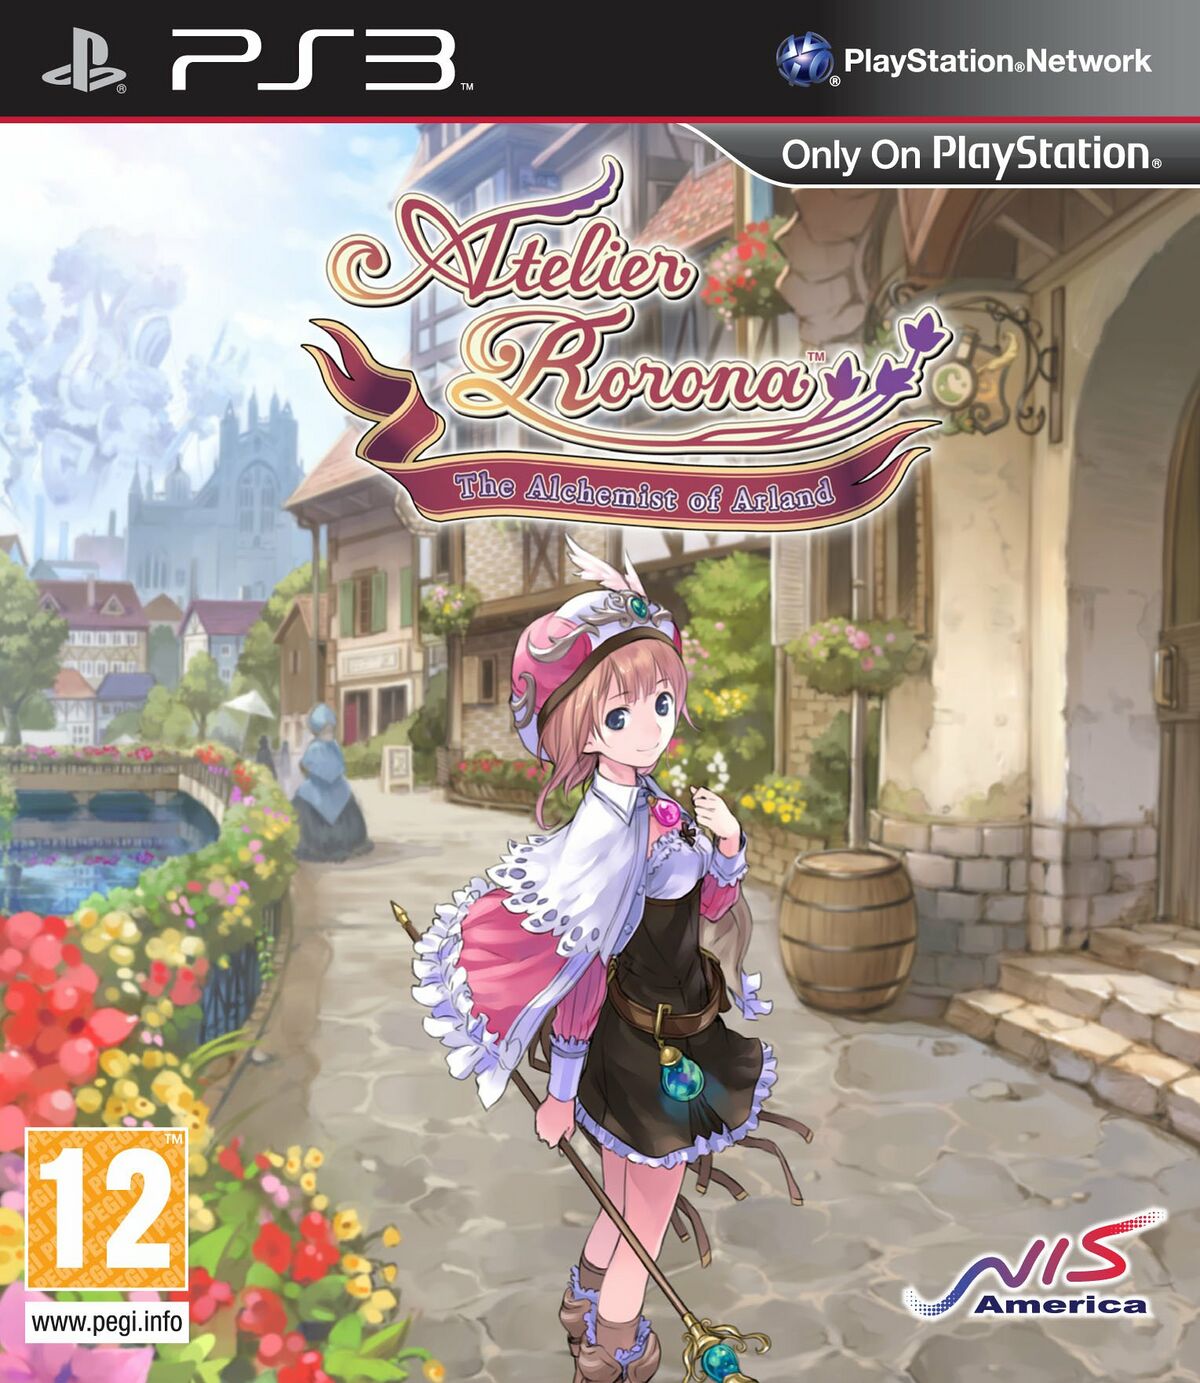 file-atelier-rorona-box-jpg-strategywiki-the-video-game-walkthrough-and-strategy-guide-wiki